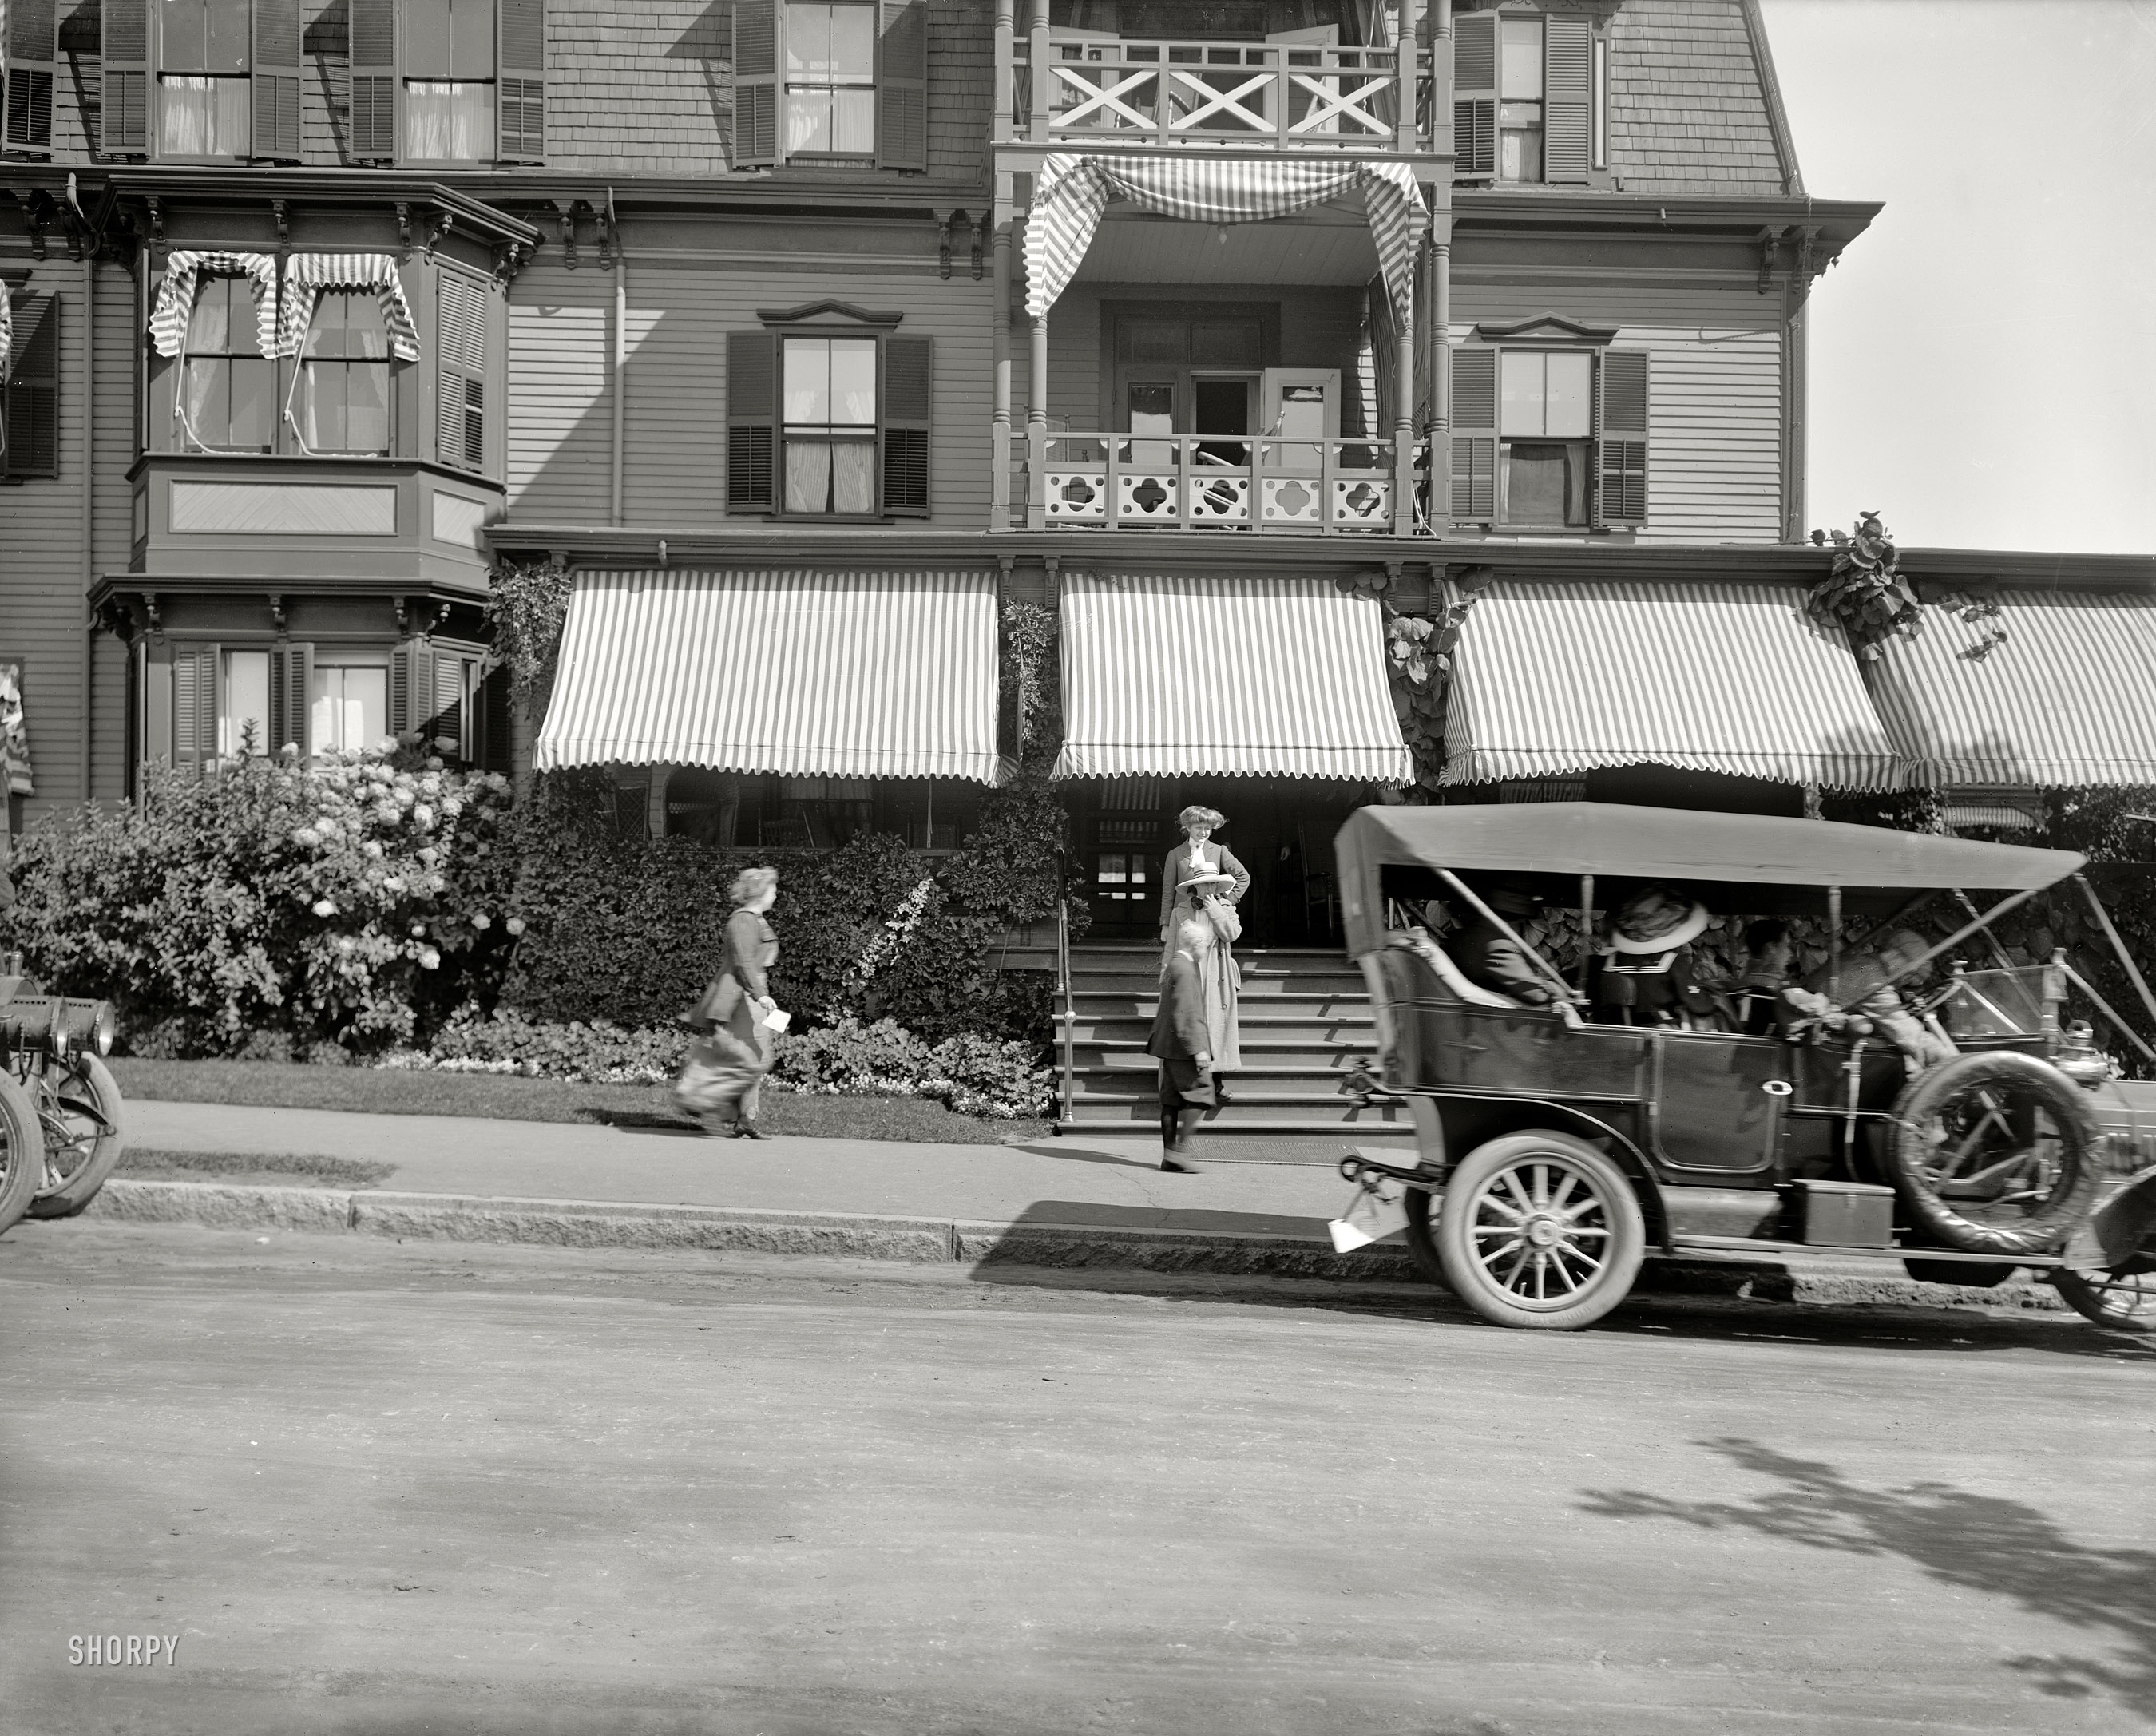 Magnolia, Massachusetts, circa 1910. "Entrance to the Oceanside." 8x10 inch dry plate glass negative, Detroit Publishing Company. View full size.